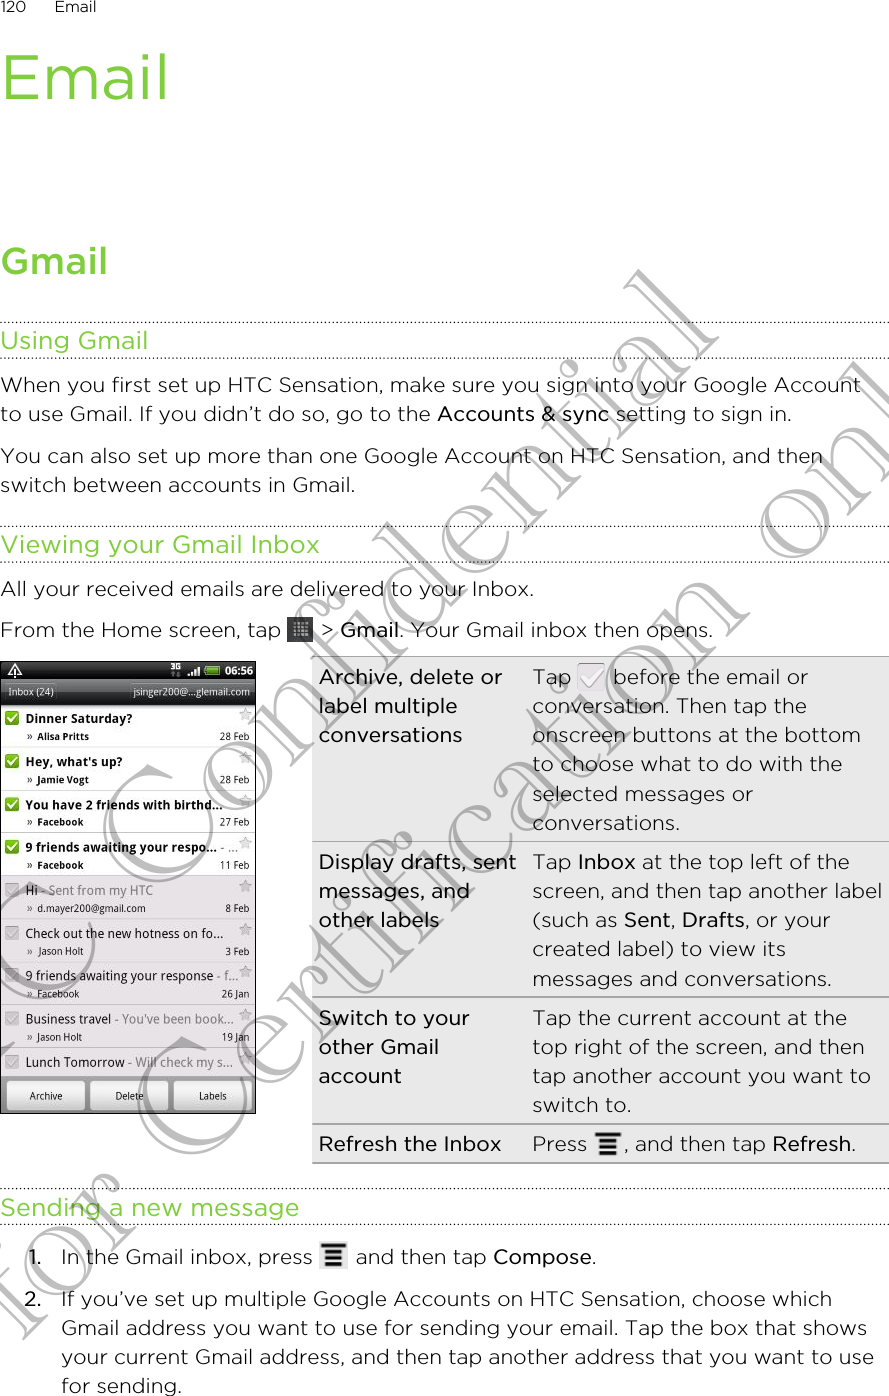 EmailGmailUsing GmailWhen you first set up HTC Sensation, make sure you sign into your Google Accountto use Gmail. If you didn’t do so, go to the Accounts &amp; sync setting to sign in.You can also set up more than one Google Account on HTC Sensation, and thenswitch between accounts in Gmail.Viewing your Gmail InboxAll your received emails are delivered to your Inbox.From the Home screen, tap   &gt; Gmail. Your Gmail inbox then opens.Archive, delete orlabel multipleconversationsTap   before the email orconversation. Then tap theonscreen buttons at the bottomto choose what to do with theselected messages orconversations.Display drafts, sentmessages, andother labelsTap Inbox at the top left of thescreen, and then tap another label(such as Sent, Drafts, or yourcreated label) to view itsmessages and conversations.Switch to yourother GmailaccountTap the current account at thetop right of the screen, and thentap another account you want toswitch to.Refresh the Inbox Press  , and then tap Refresh.Sending a new message1. In the Gmail inbox, press   and then tap Compose.2. If you’ve set up multiple Google Accounts on HTC Sensation, choose whichGmail address you want to use for sending your email. Tap the box that showsyour current Gmail address, and then tap another address that you want to usefor sending.120 EmailHTC Confidential for Certification only